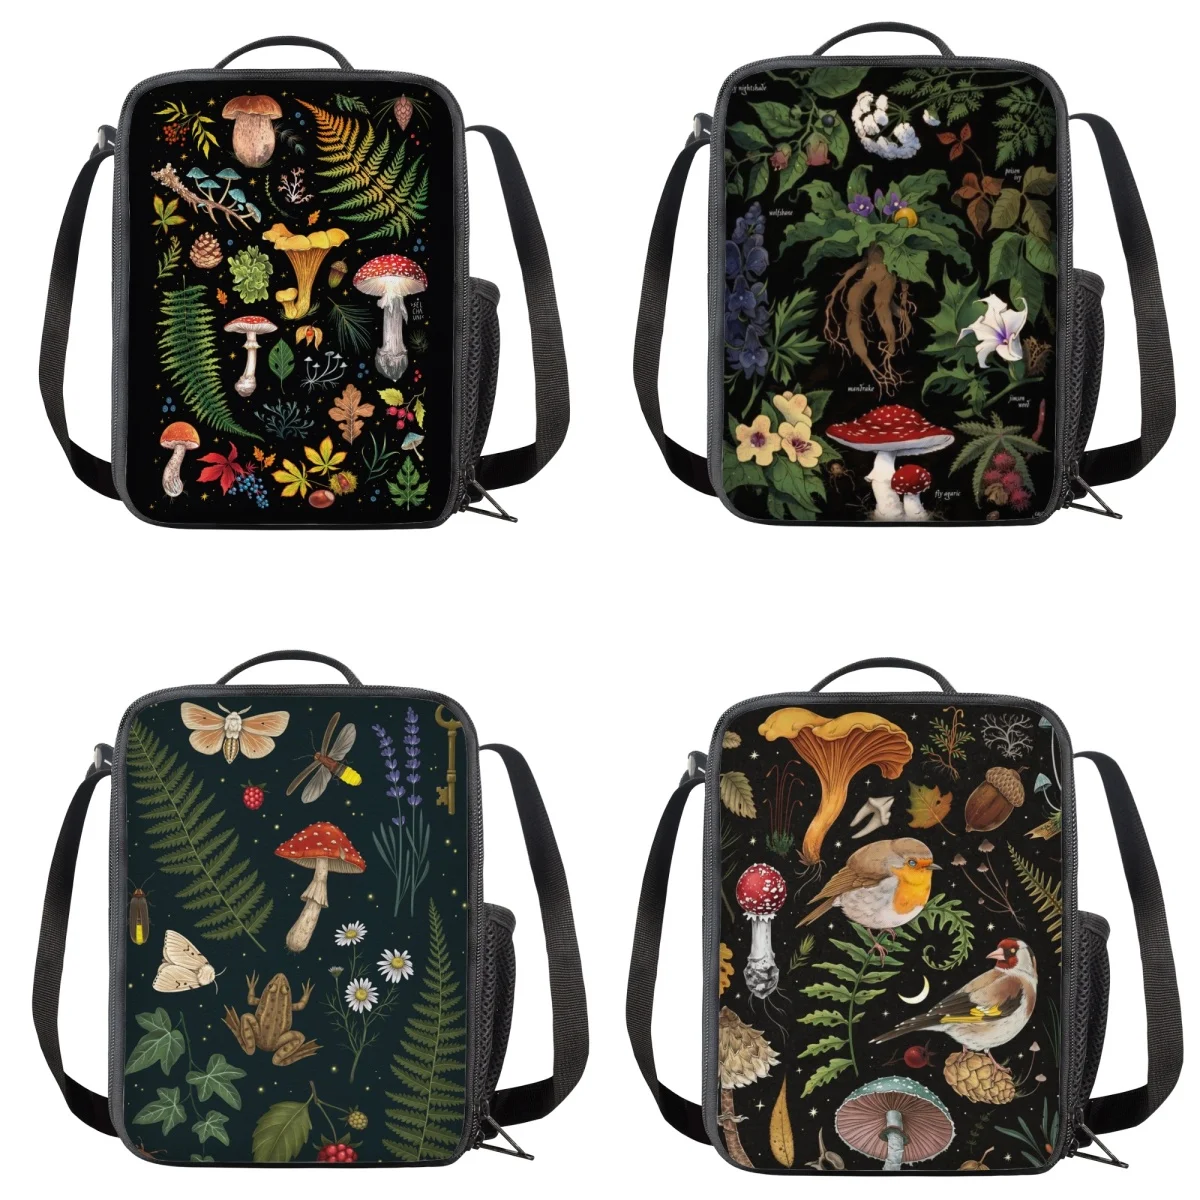 

Fashion Mushroom Print Lunch Bag Portable Insulated Cooler Bags Thermal Food Picnic Lunchbox Women Kids Lancheira Lunch Box Tote